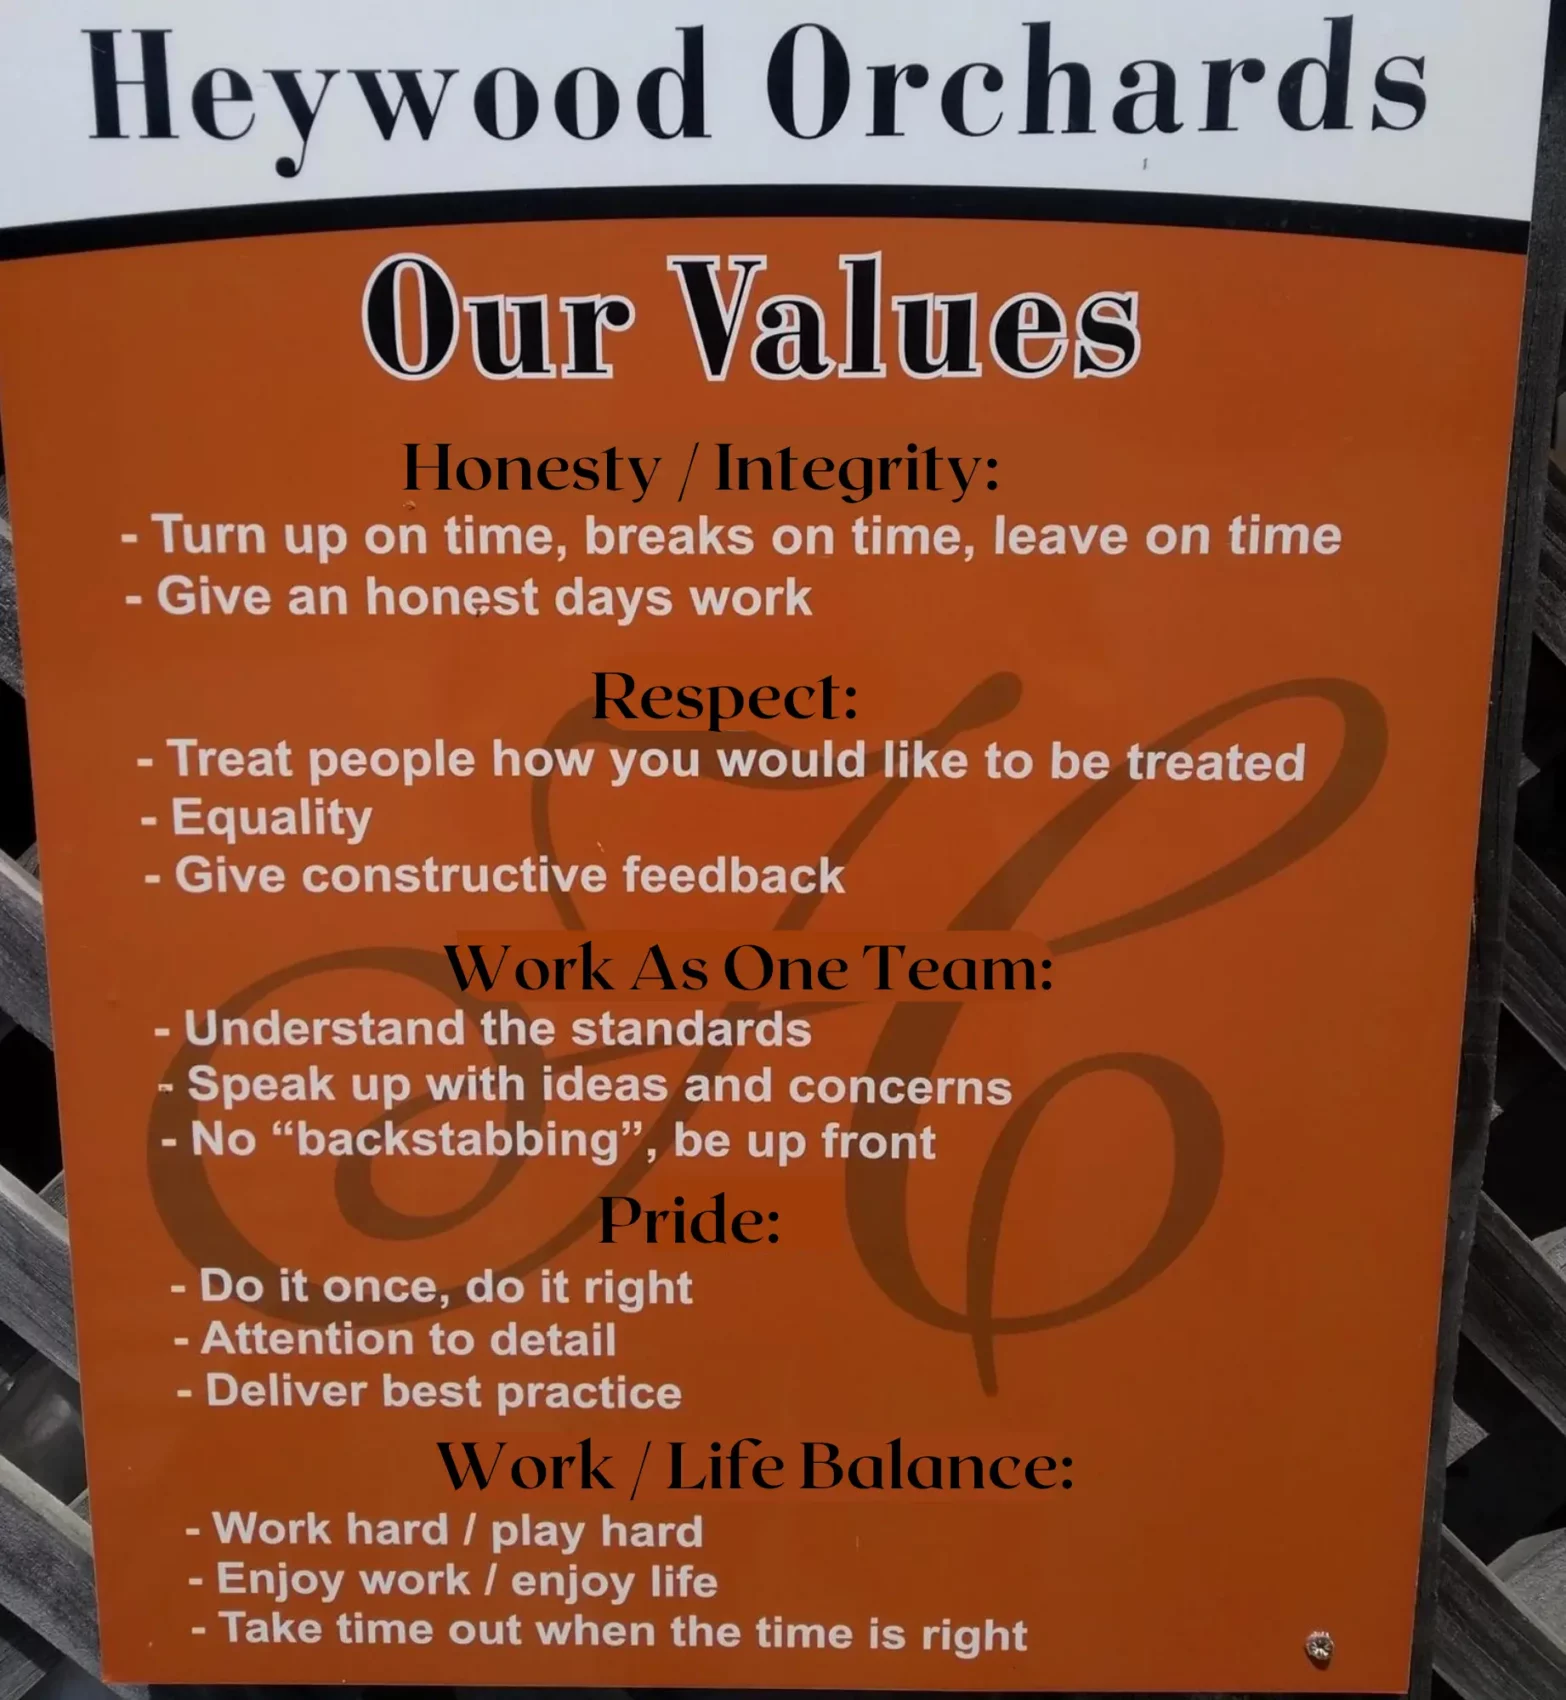 Sign showing Heywood Orchards workplace values